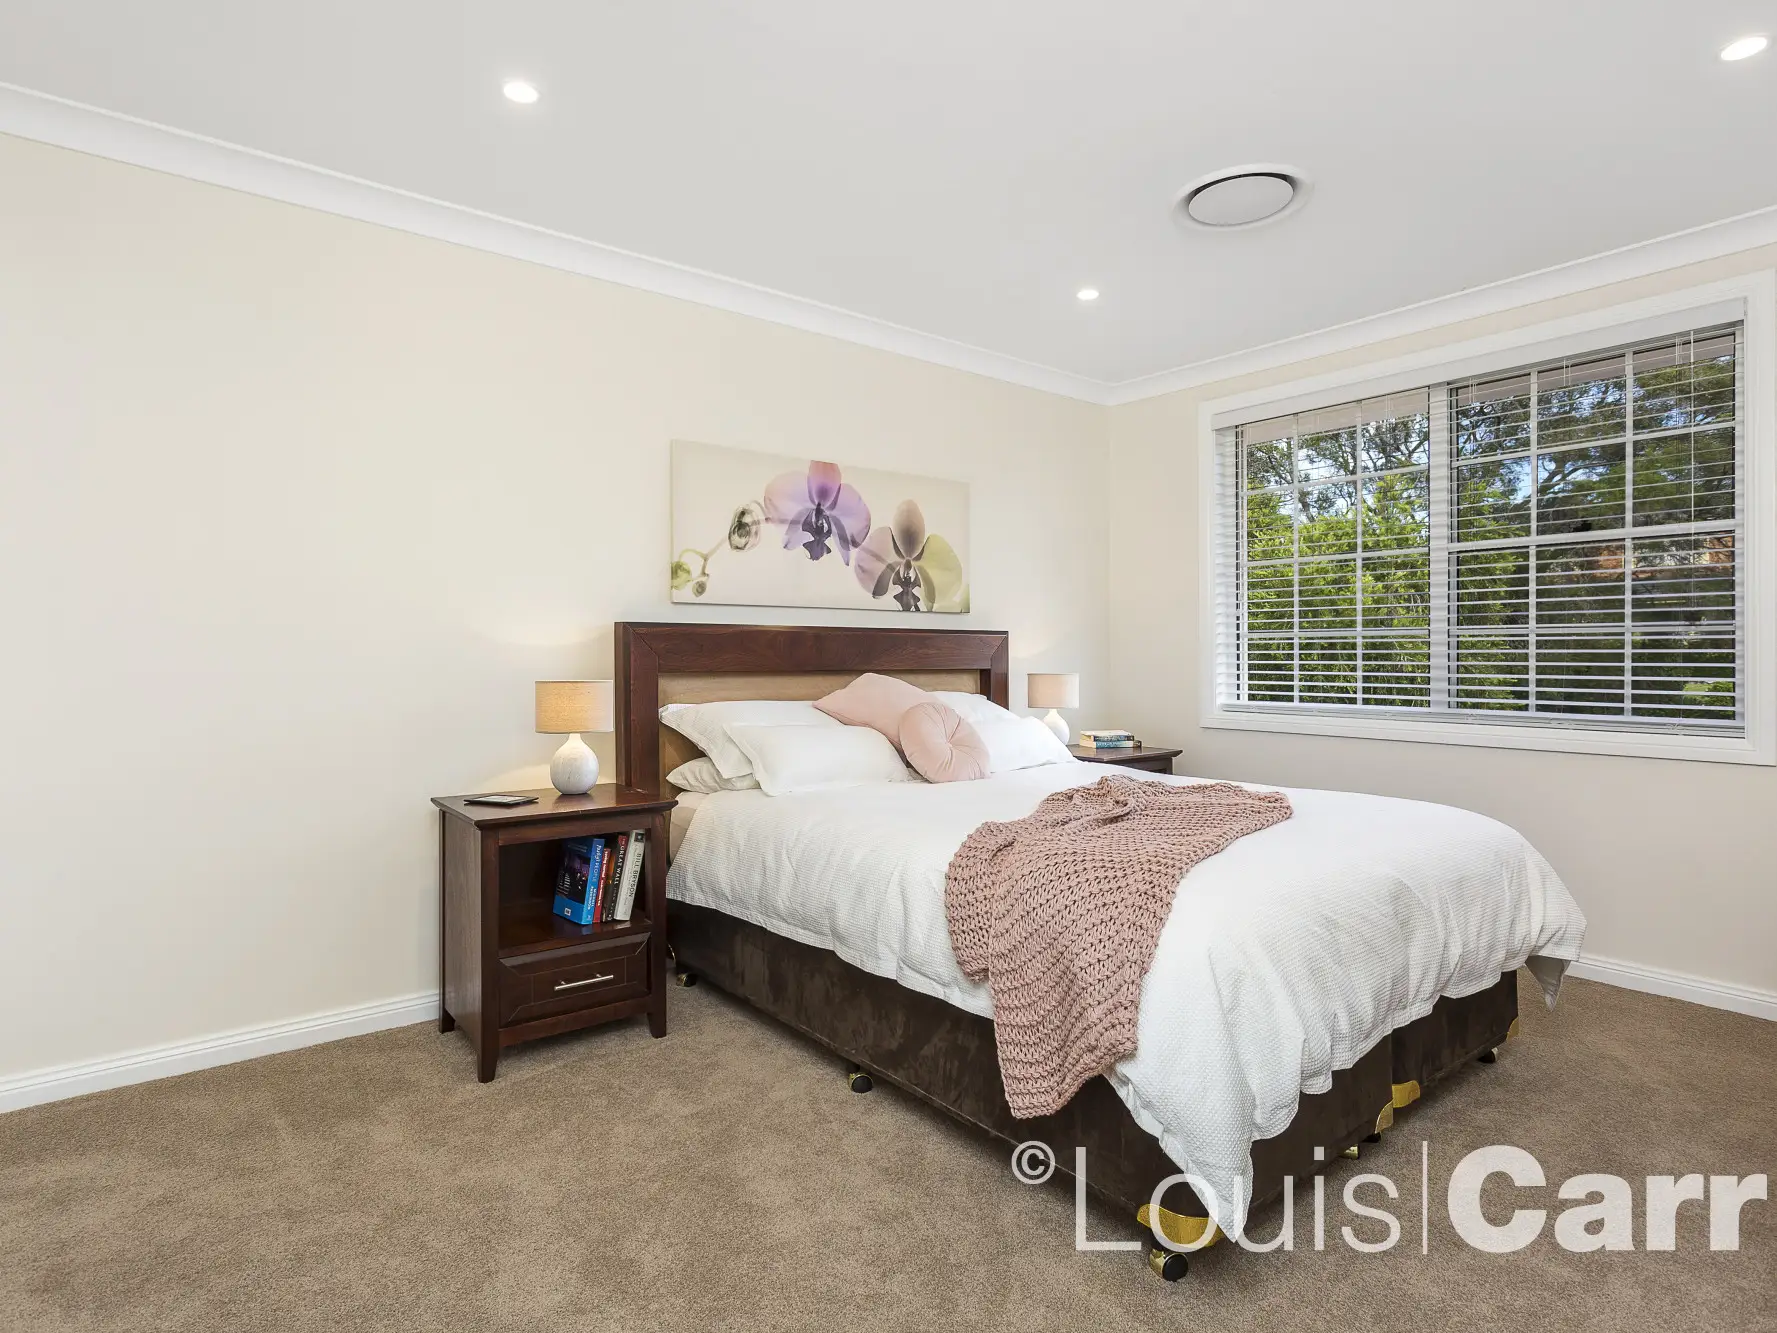 Photo #10: 6 Pineview Place, Dural - Sold by Louis Carr Real Estate